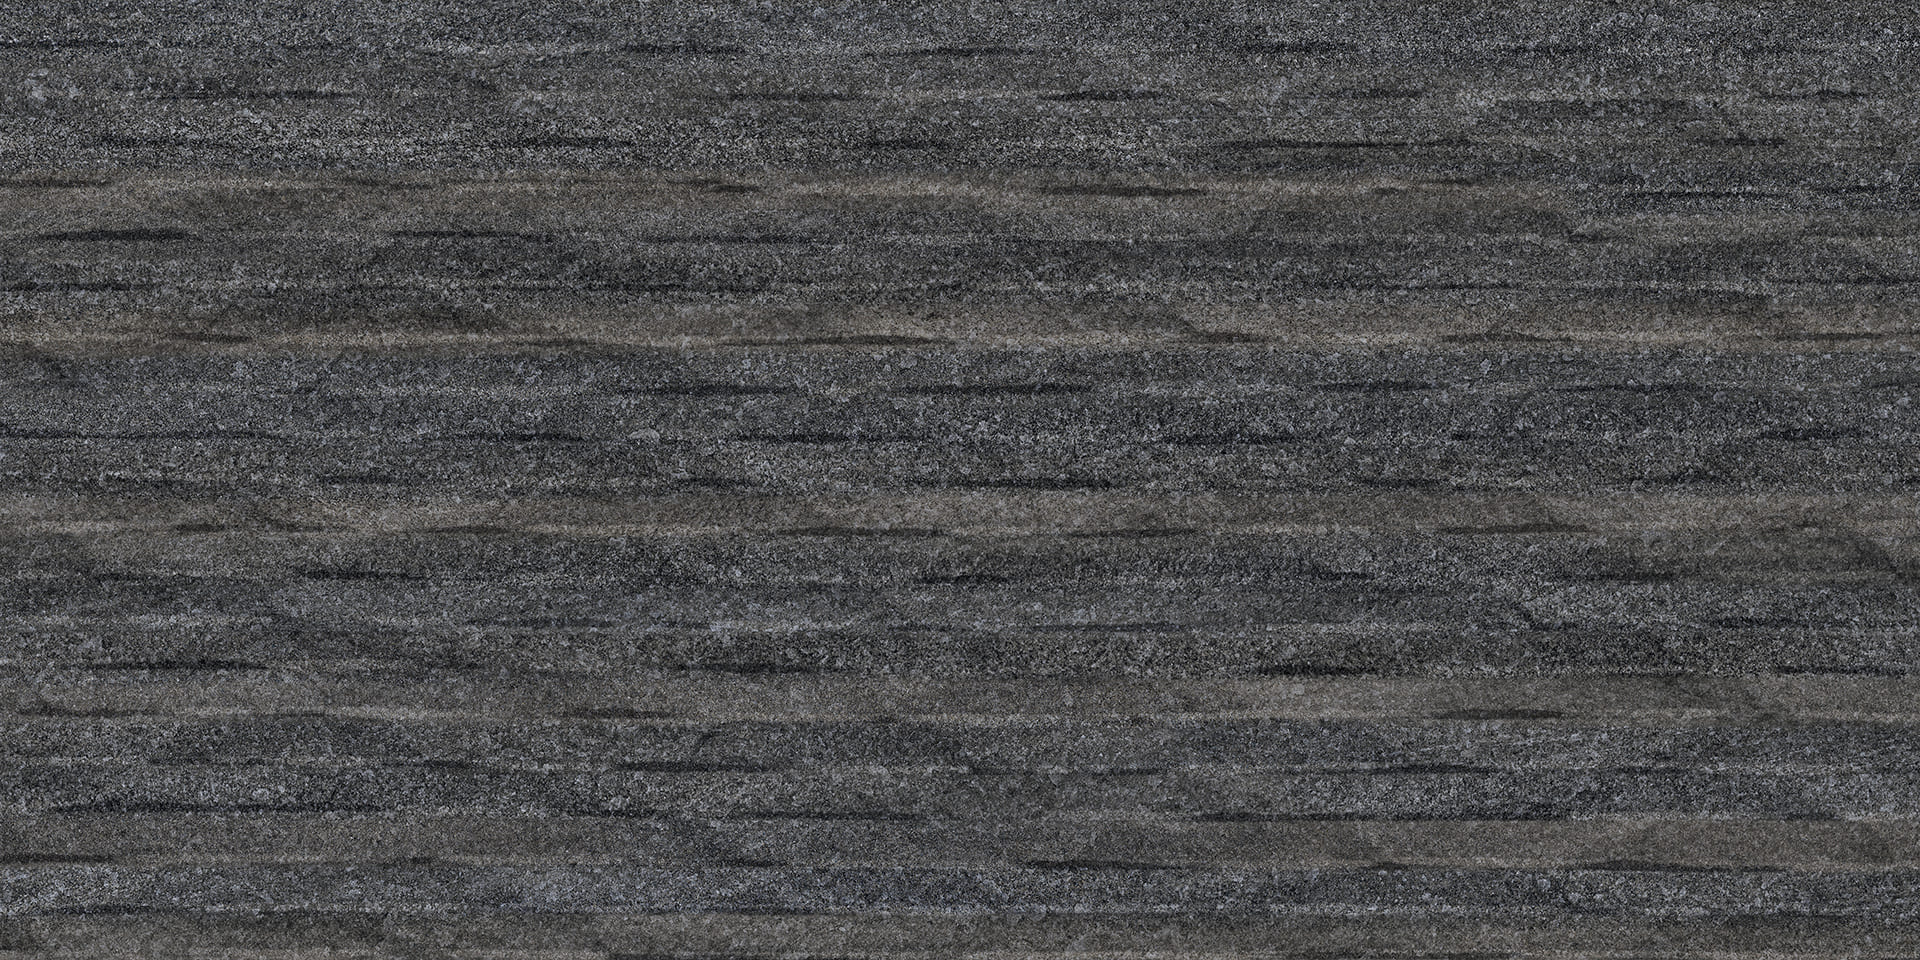 Elegance Pro: Mural Anthracite Wall Tile (12"x24"x9.5-mm | matte)